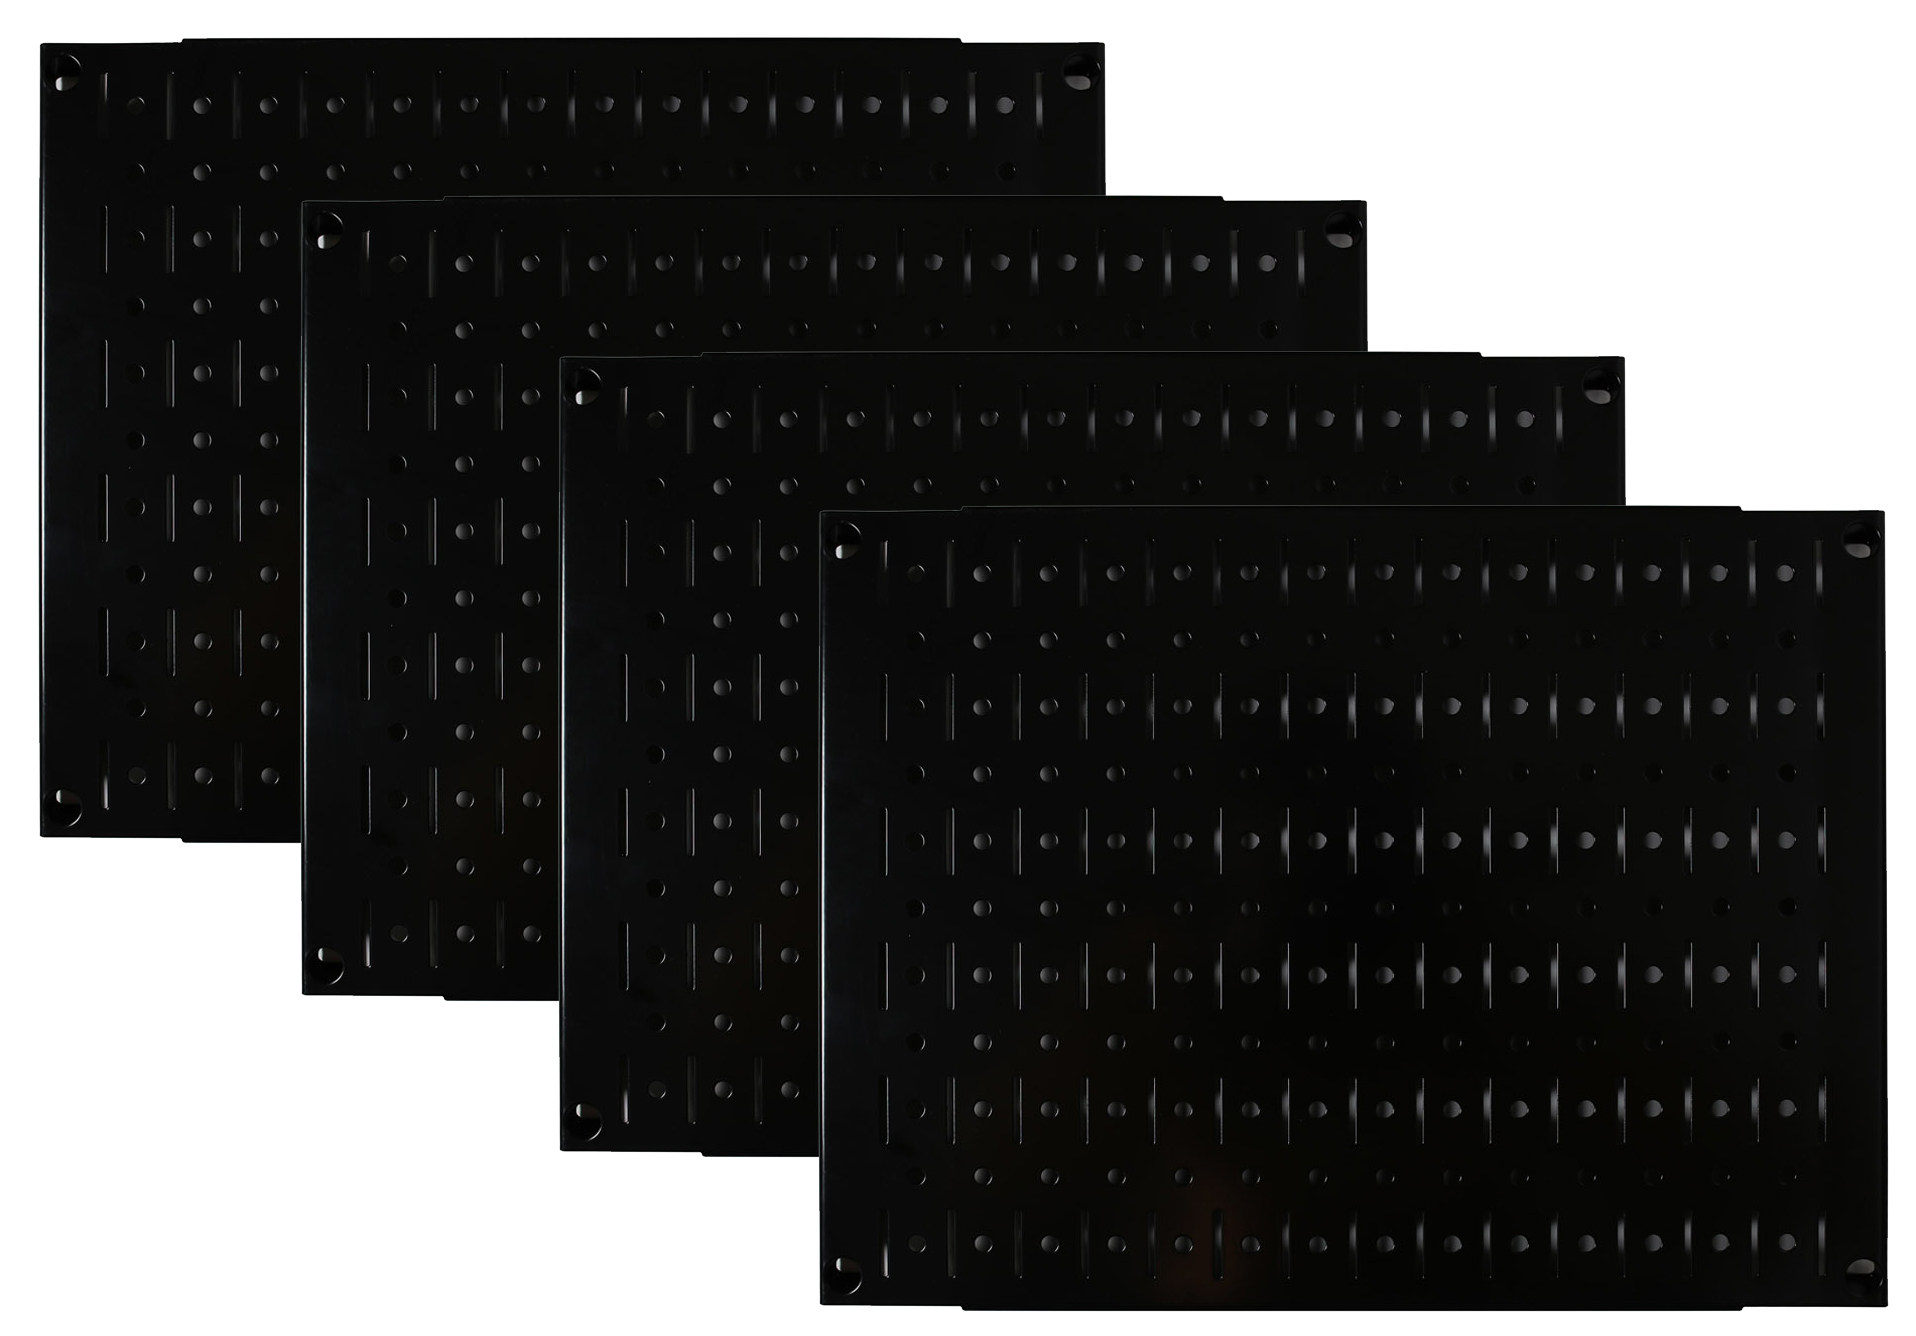 Pegboard Wall Organizer Tiles - Wall Control Modular Black Metal Pegboard Tiling Set - Four 12-Inch Tall x 16-Inch Wide Peg Board Panel Wall Storage Tiles - Easy to Install (Black) - image 1 of 11